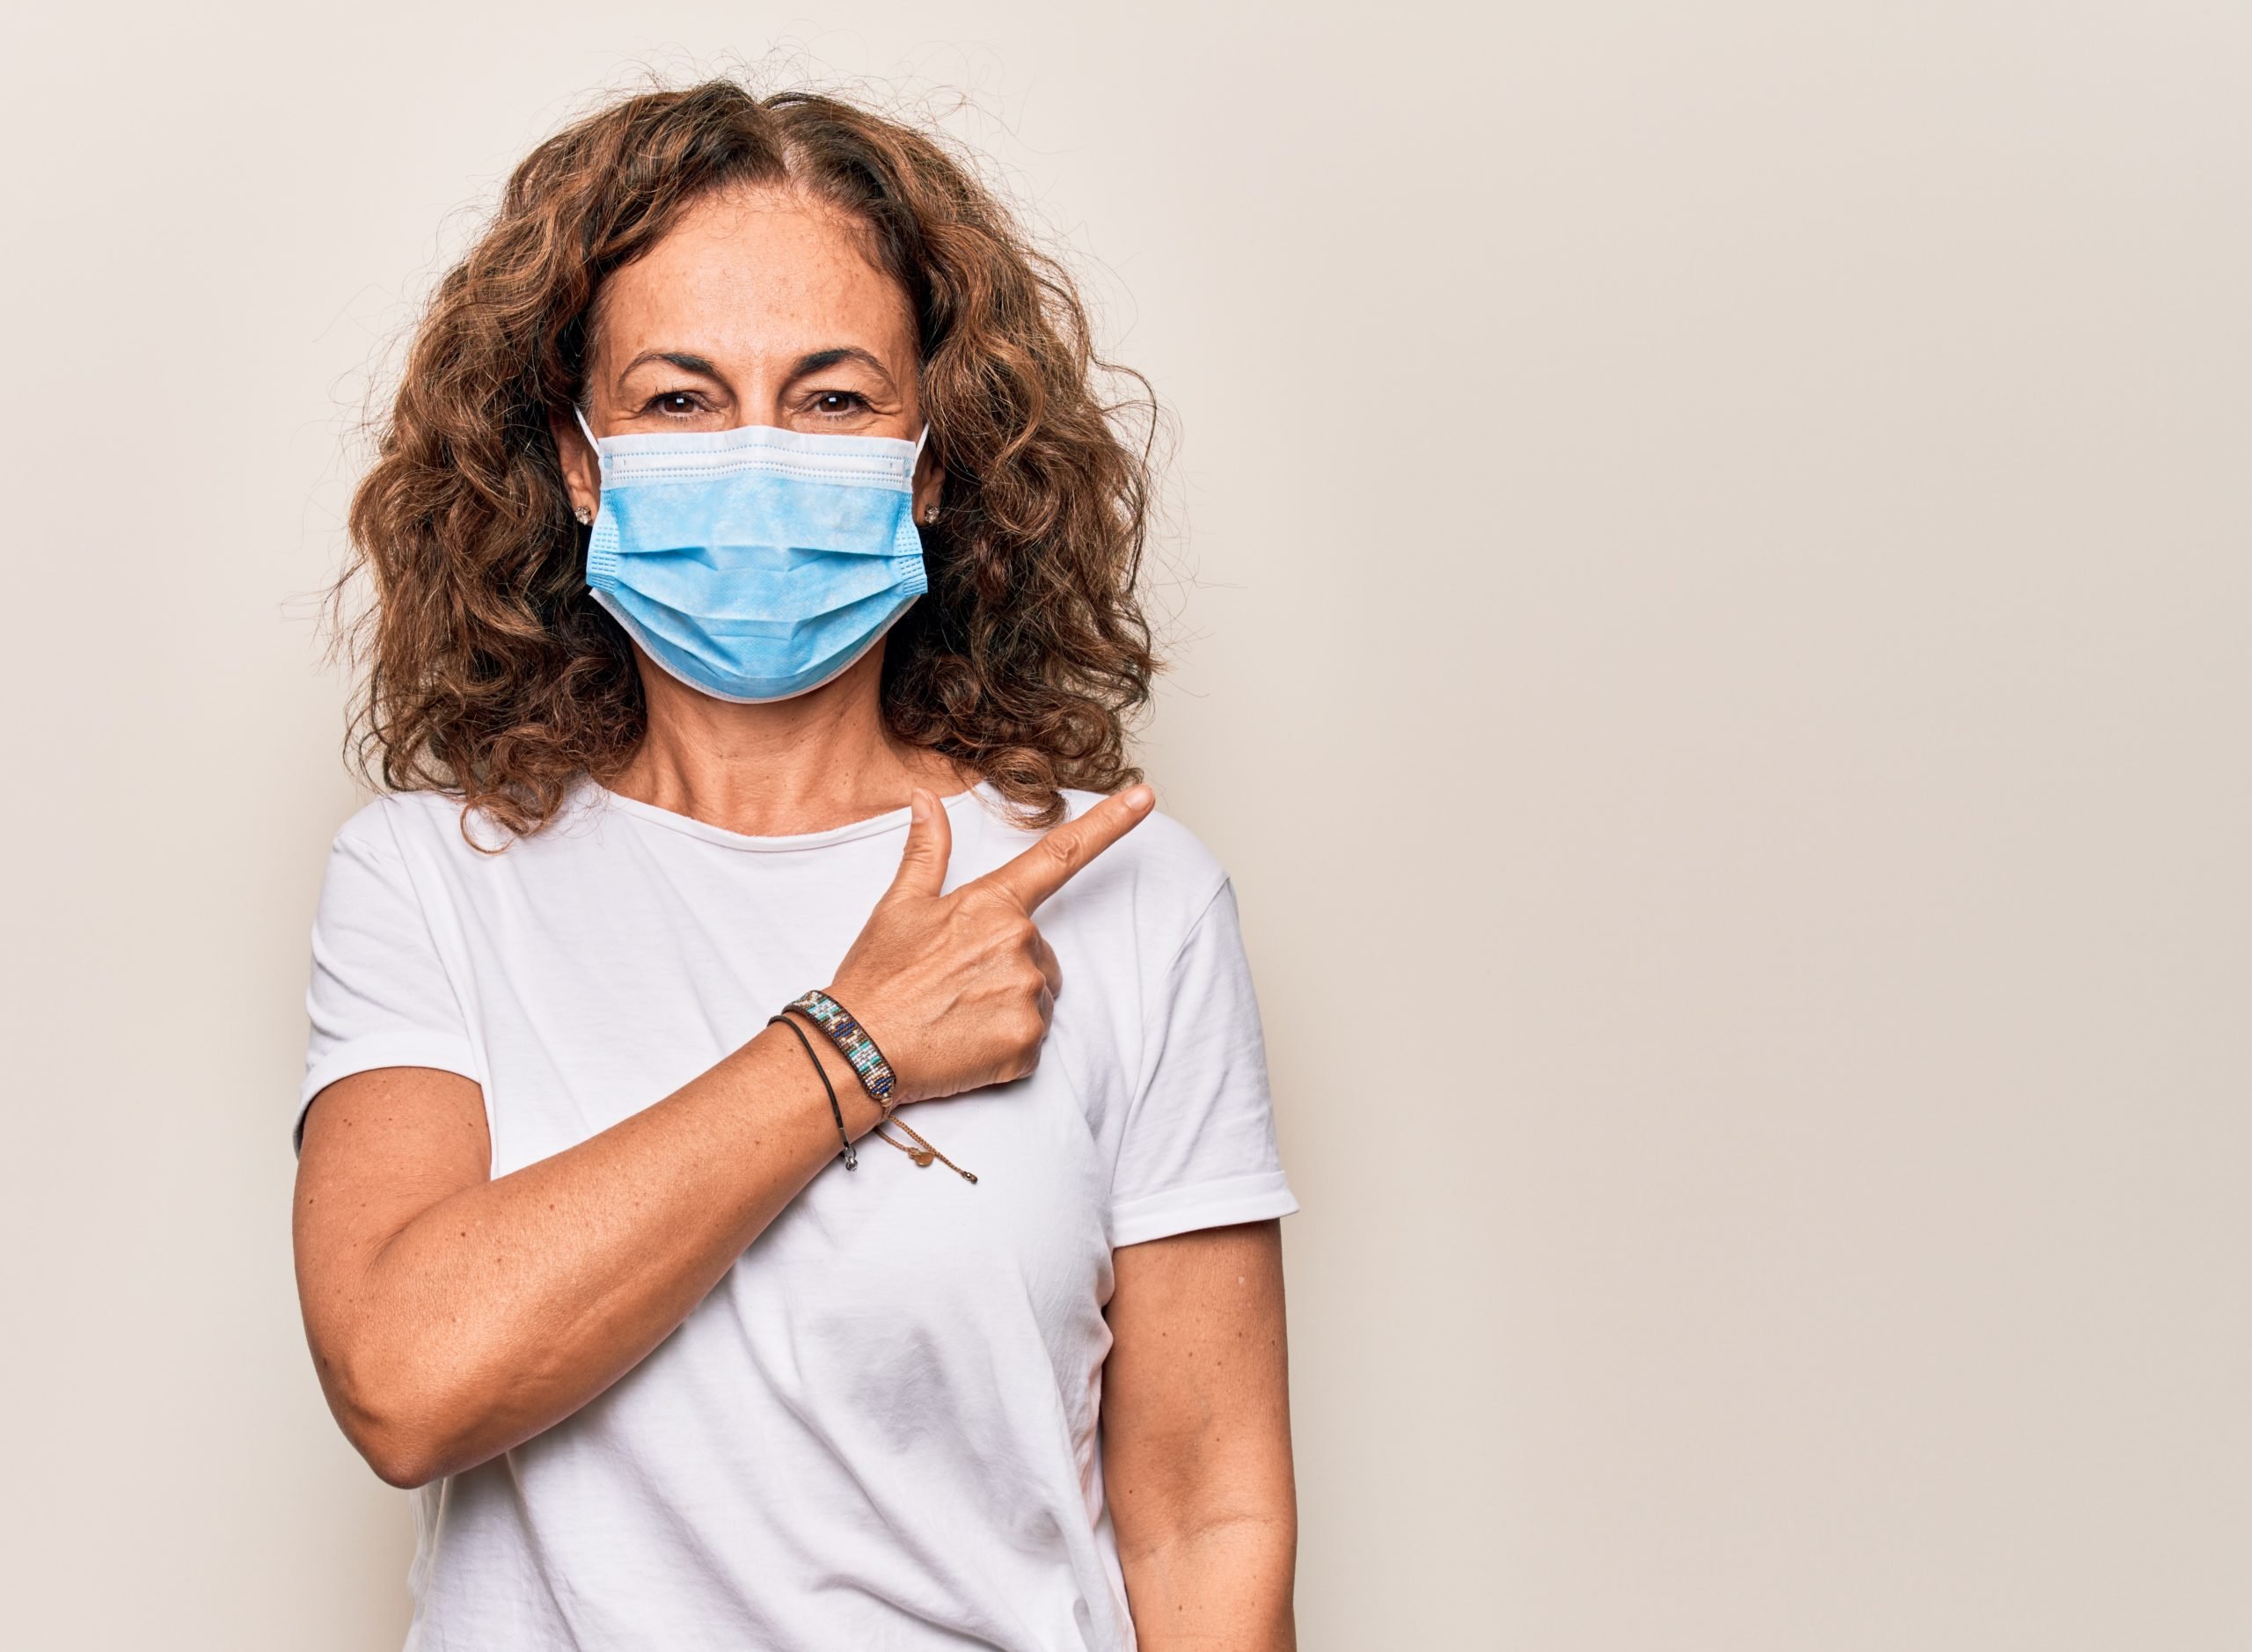 A woman with curly brown hair wearing a blue mask on a beige background.